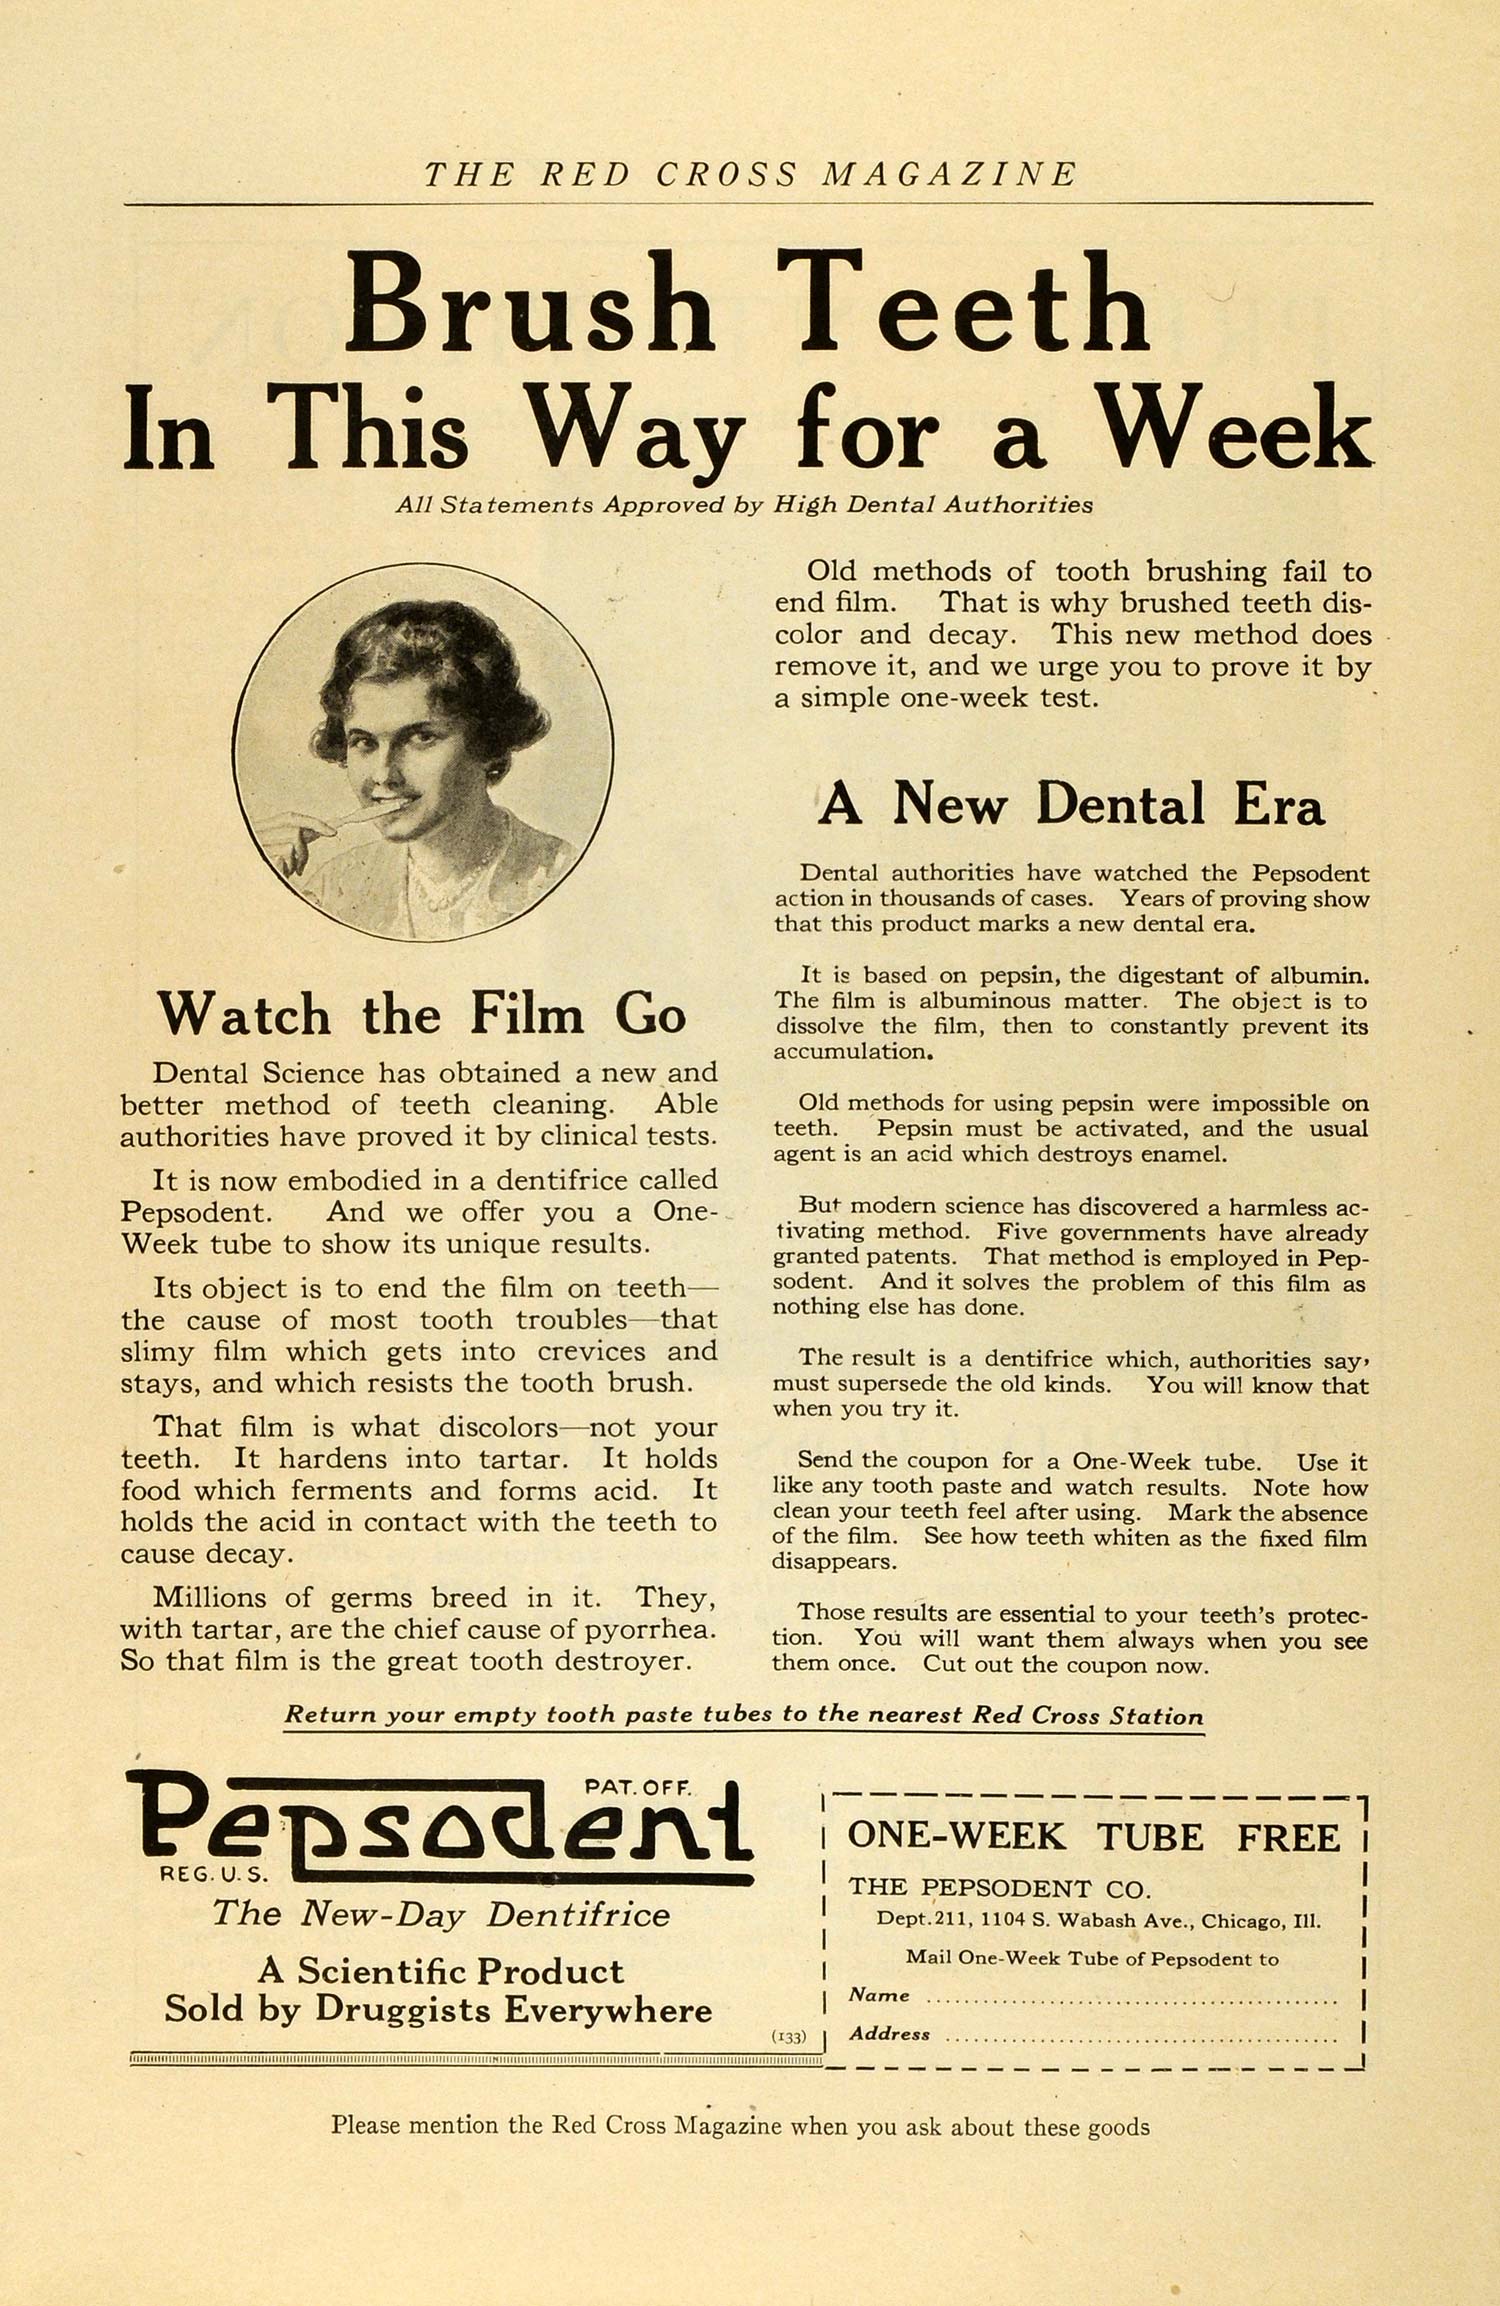 1918 Ad Pepsodent Dental Era Dentifrice Clean Teeth Brush Toothpaste WWI RCM1